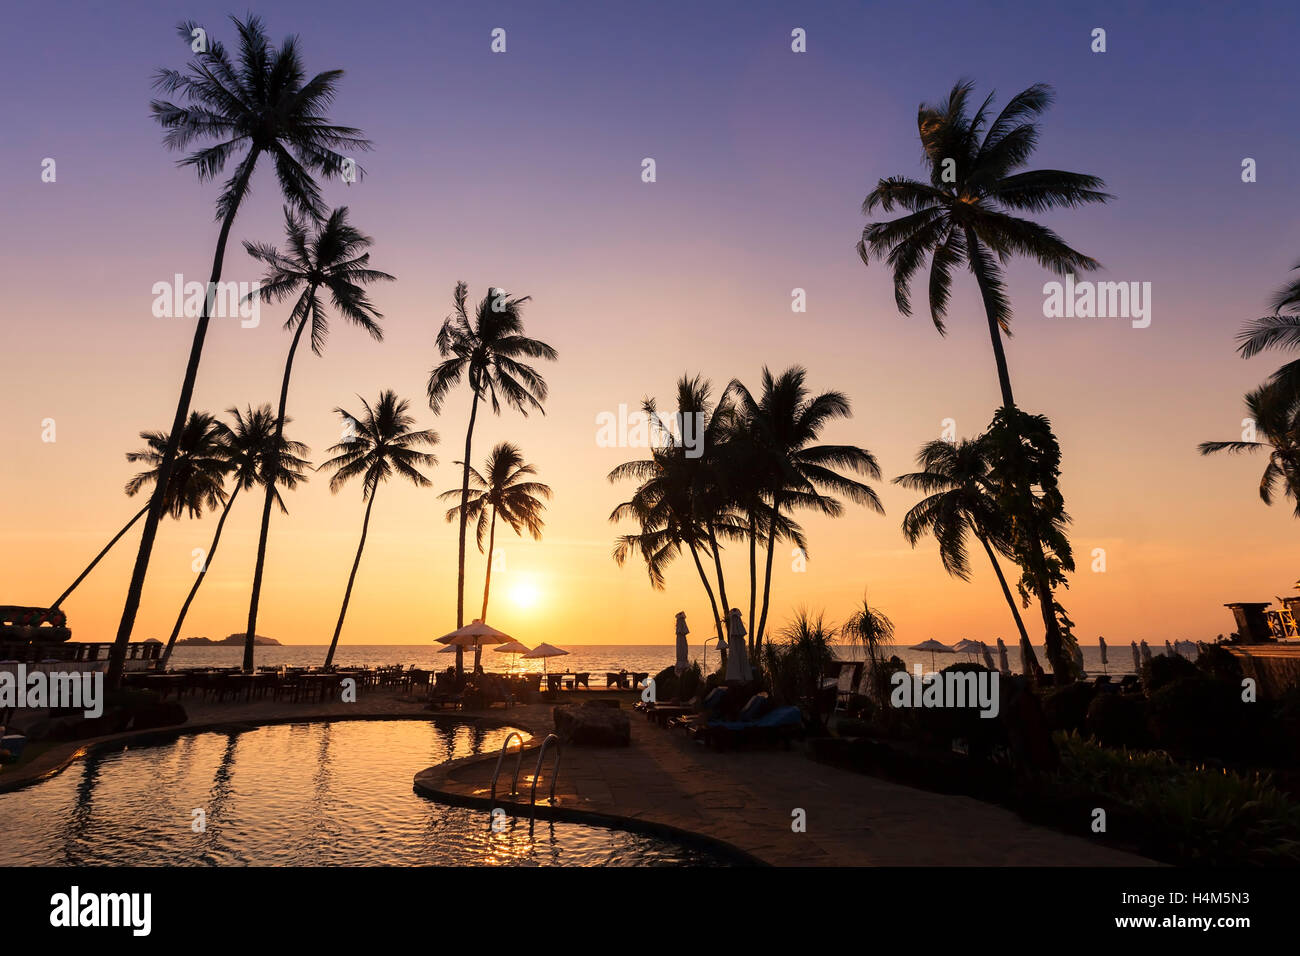 Relaxation time in a beautiful beach hotel and resort near tropical sea at sunset Stock Photo